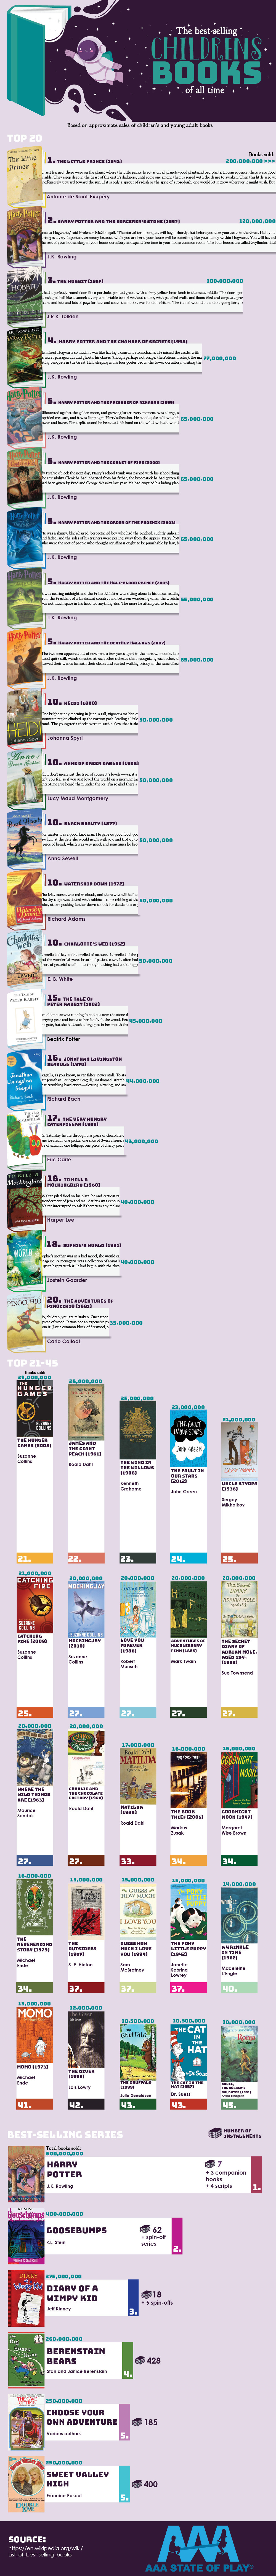 The Best-Selling Children’s Books of All Time